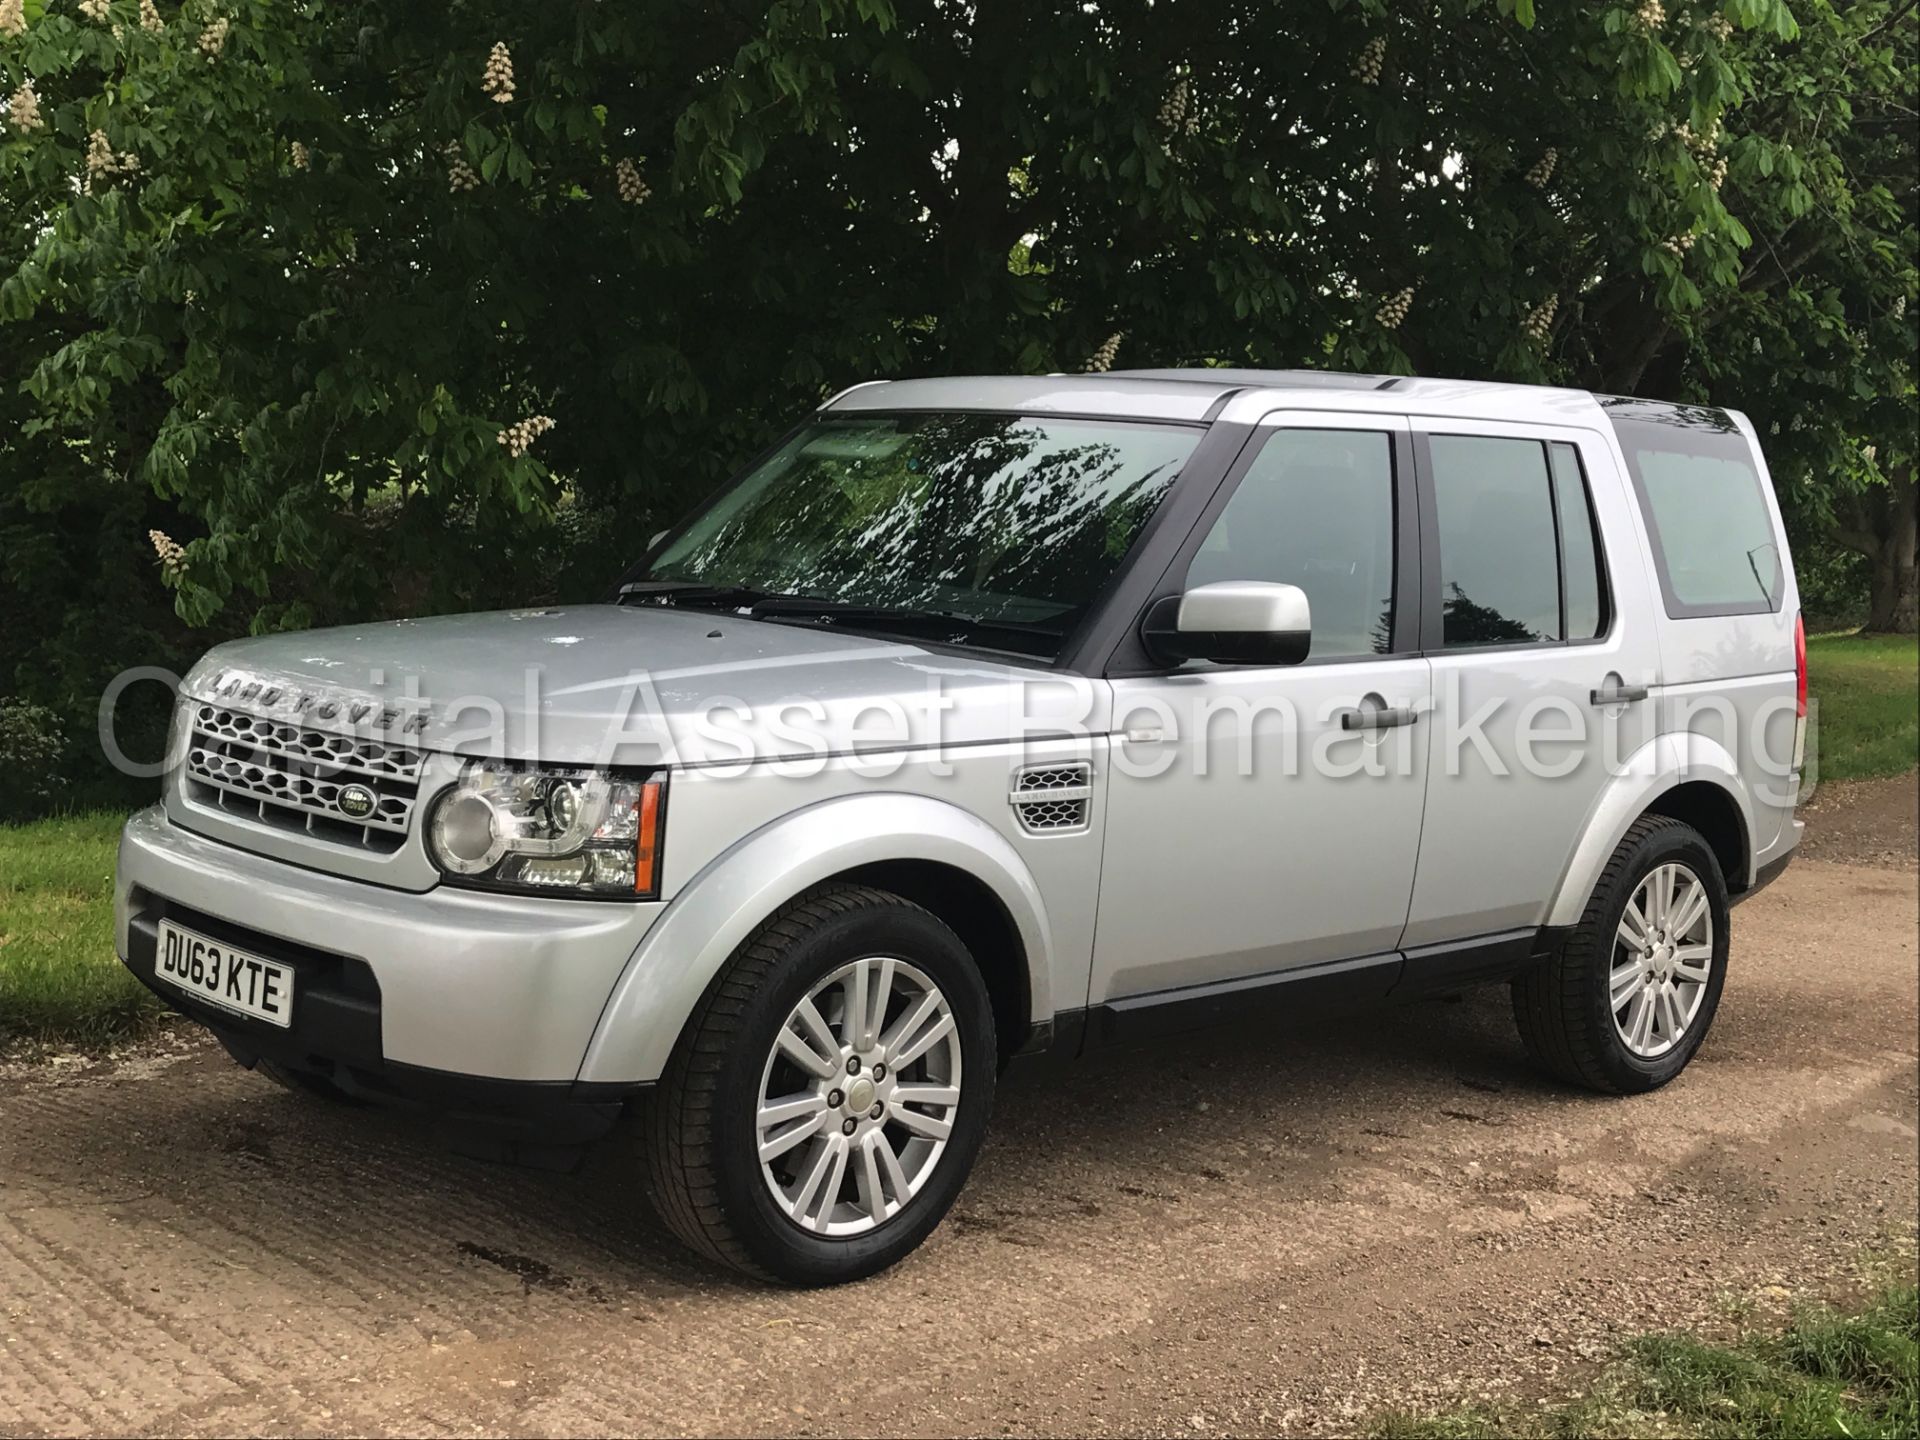 (On sale) LAND ROVER DISCOVERY 4 (2014 MODEL) '3.0 SDV6 -AUTO- 255 BHP - 7 SEATER'(1 OWNER FROM NEW) - Image 3 of 42